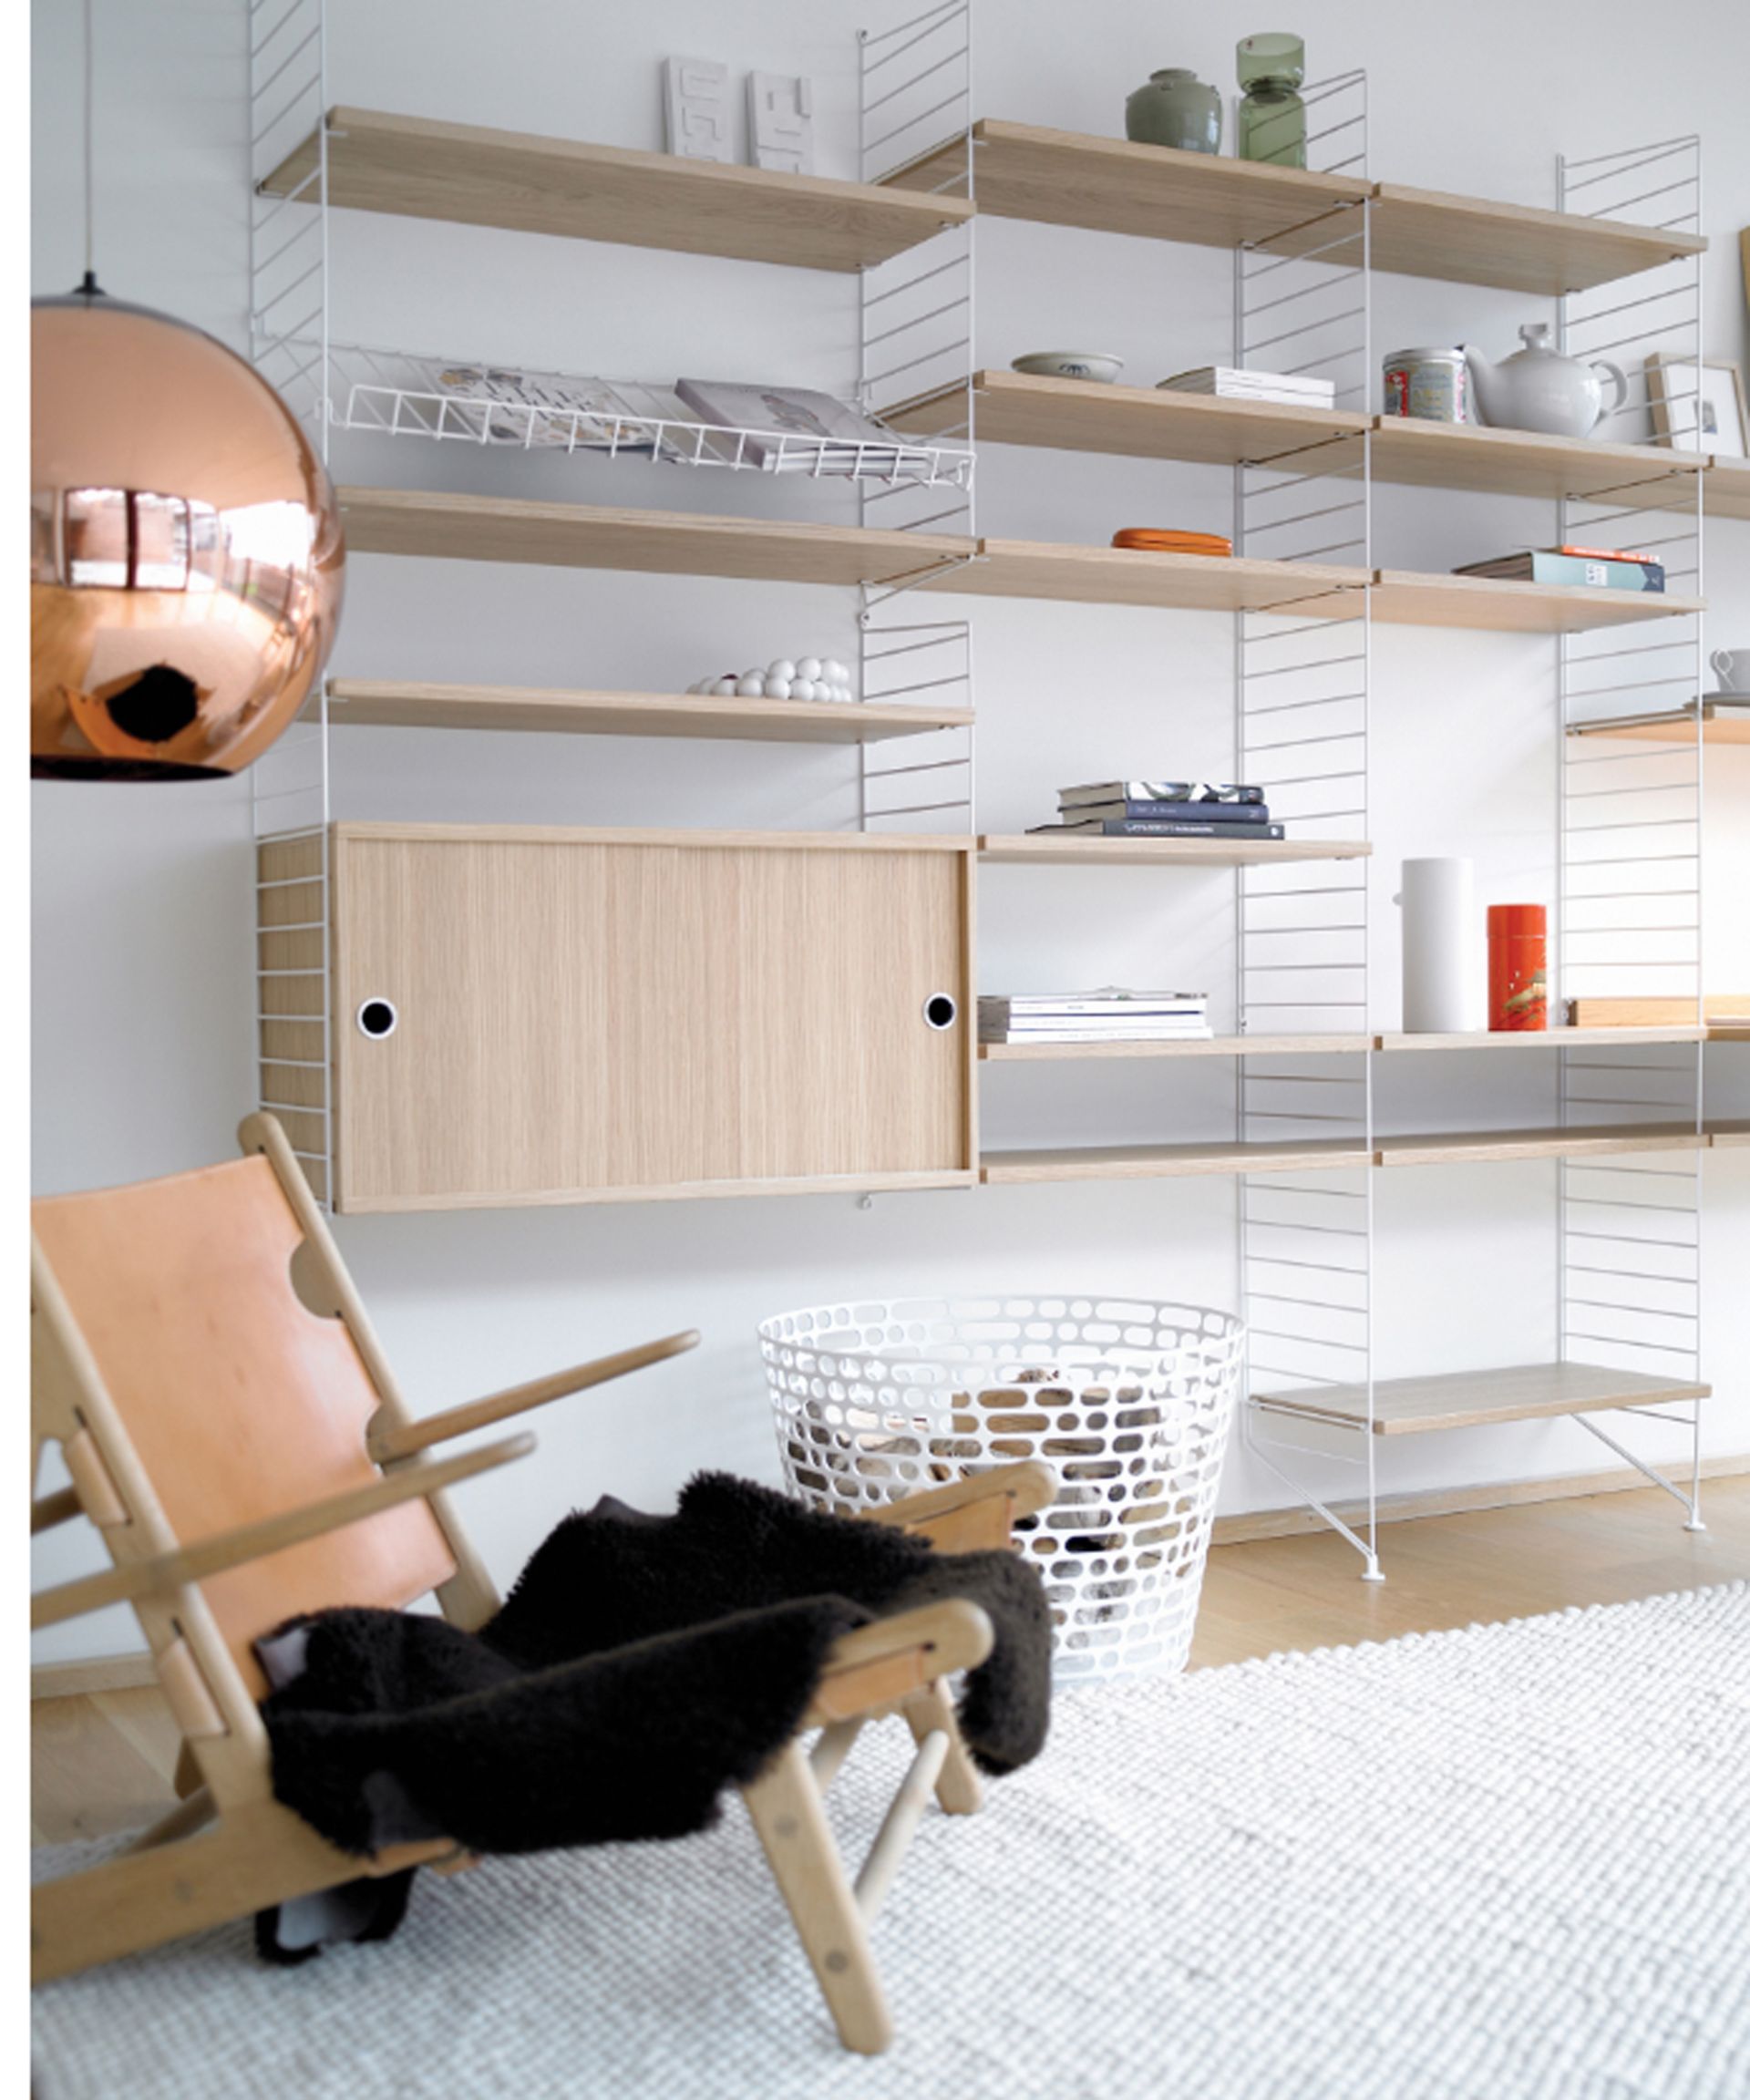 <p>                     When your floor space is at a premium but you need to add storage to your apartment living room, open shelving is the way to go.                   </p>                                      <p>                     'We suggest you use all the available space you have, including your walls. You can use shelves, but also use your walls to store your dining chairs for easy access and to not clutter your floor space,' explain Henderson and Bradley.                    </p>                                      <p>                     Peter Erlandsson, Co-Owner of String Furniture agrees, 'In a small room, it’s great to be able to change the design once in a while. Sleek wall shelving provides you with plenty of flexibility both practically and aesthetically, meaning you can achieve a completely new look whenever you like. There is an age old doctrine of using light colors on walls to make your home look bigger. This is true, and your shelves need not detract from this.' You can invest in this String System in ash at Utility Design.                    </p>                                      <p>                     Opt for something slimline in the same color as the wall it's going to sit on, so you can maximize the storage space and so your shelving idea doesn't dominate the room too much.                   </p>